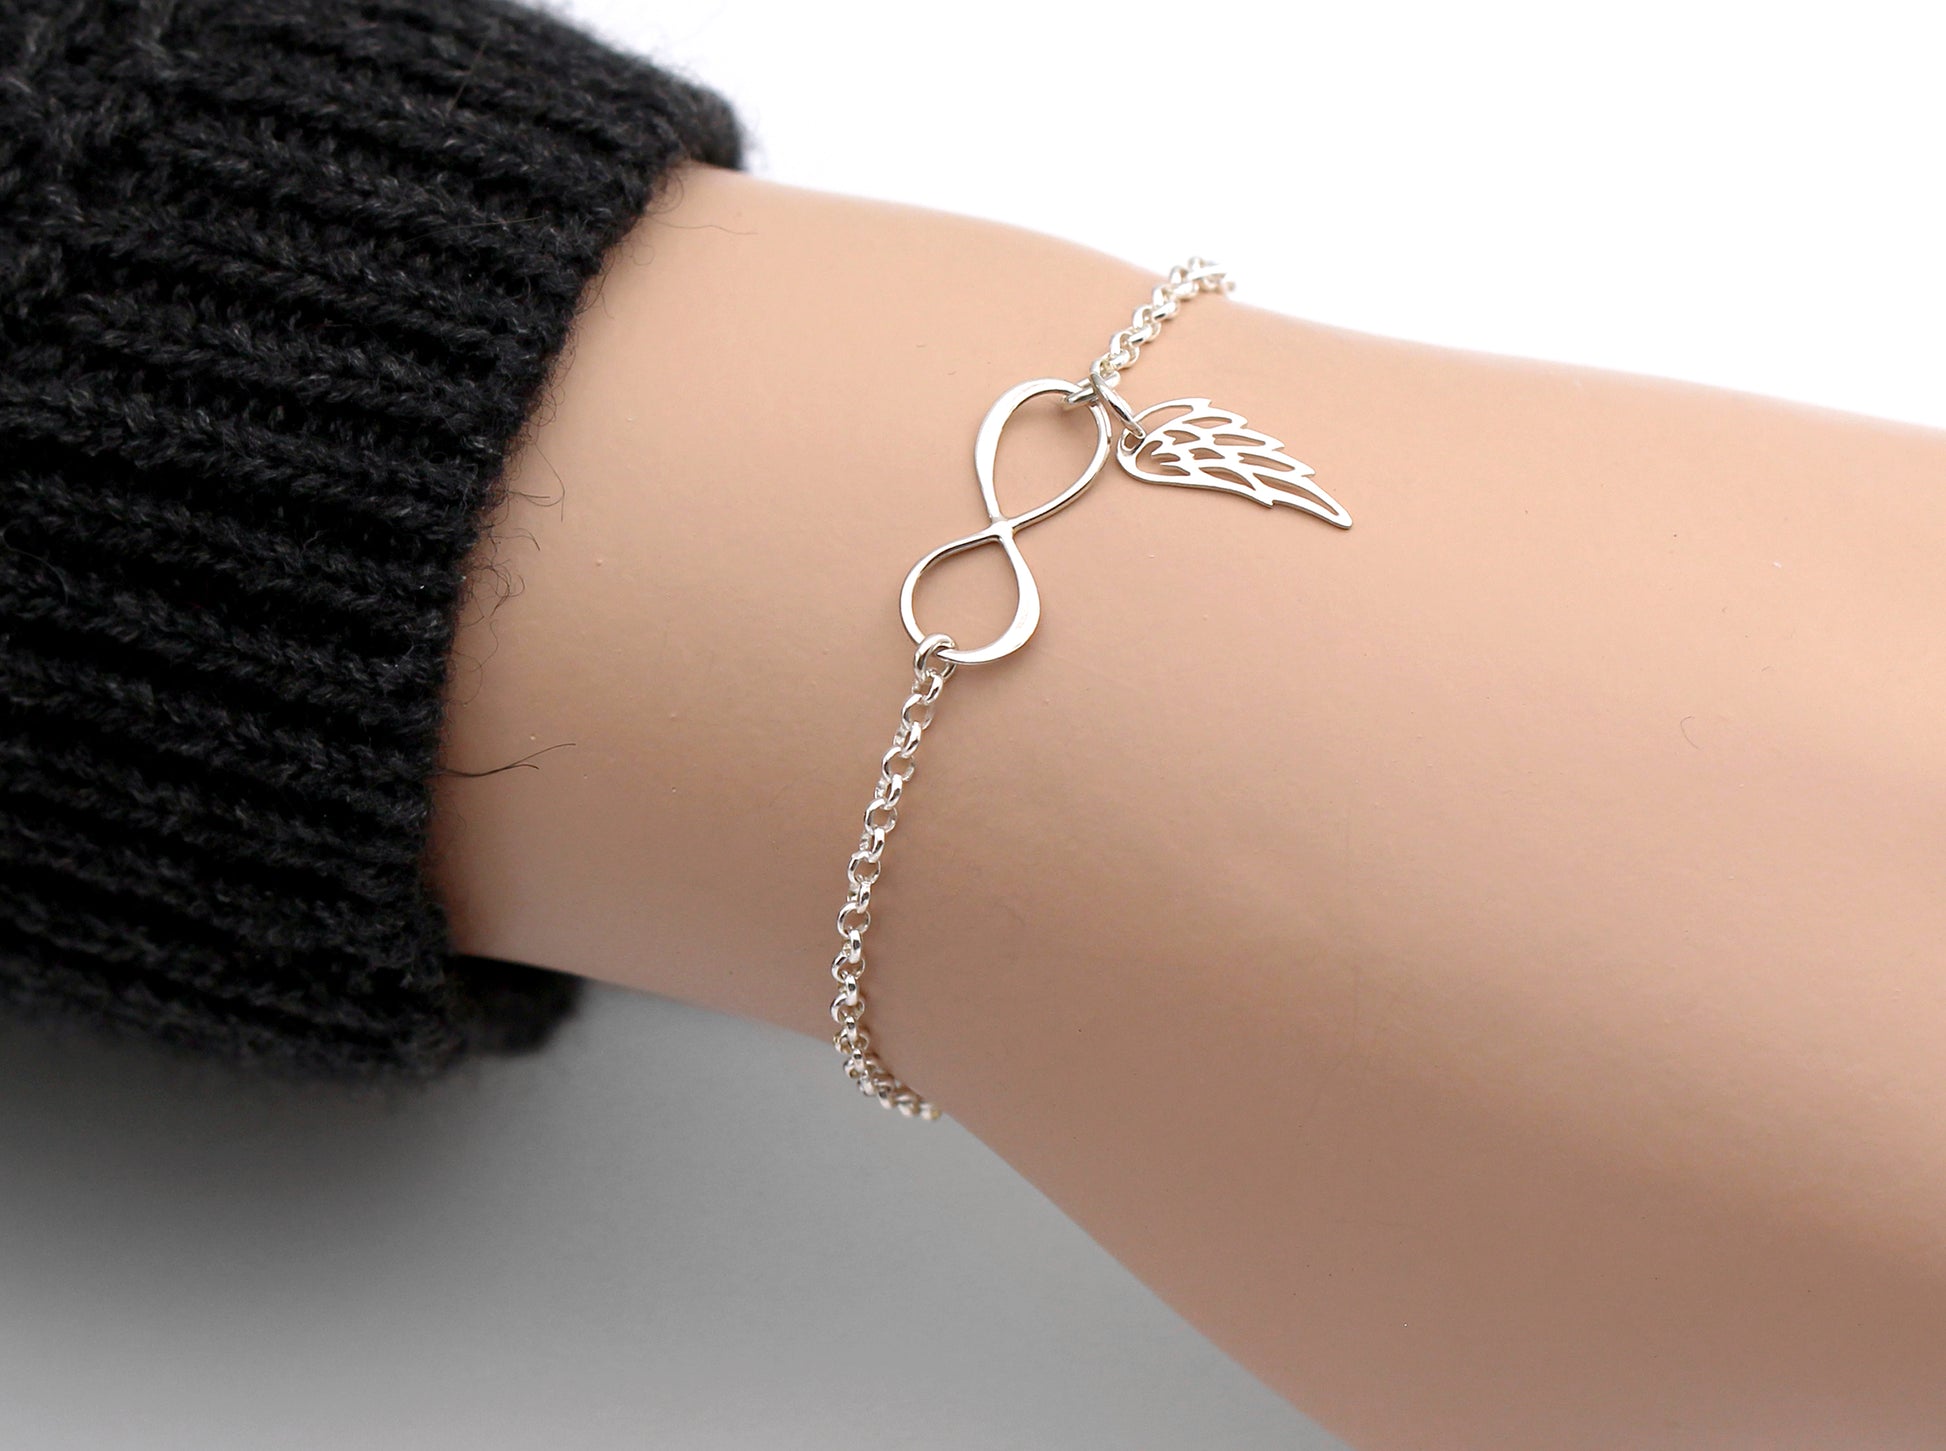 Silver bracelet with infinity and an engraving of your choice on it - ΠΣ22